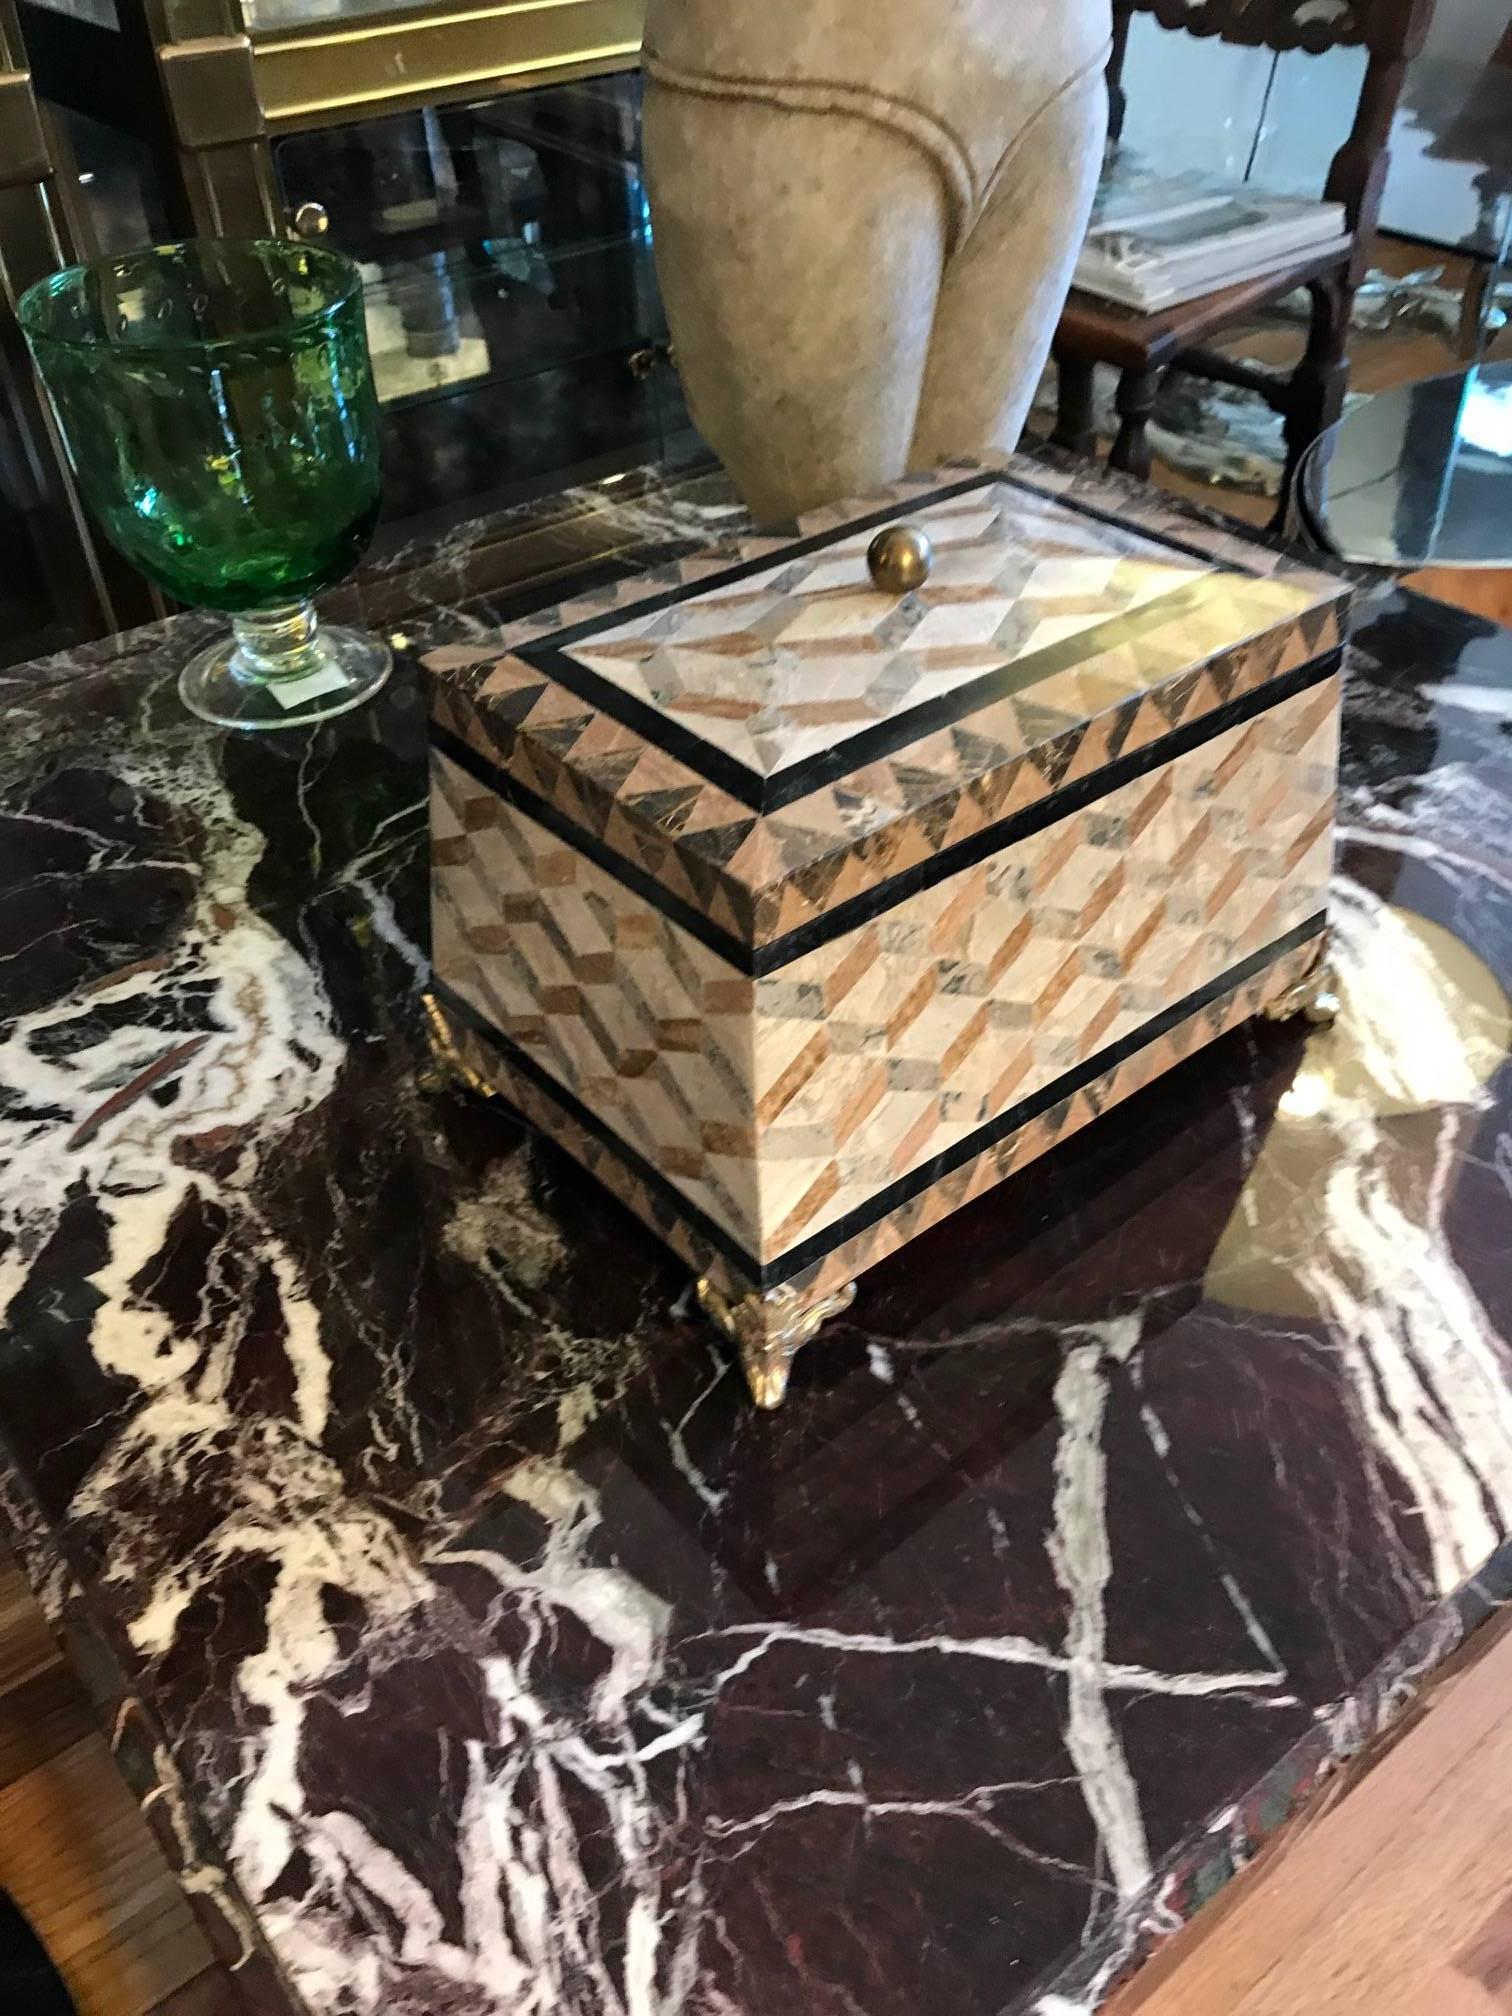 A large and impressive tessolated stone box by Maitland Smith. The interior is wood lined and the box rests on four decorative brass sabots. Finest craftsmanship.